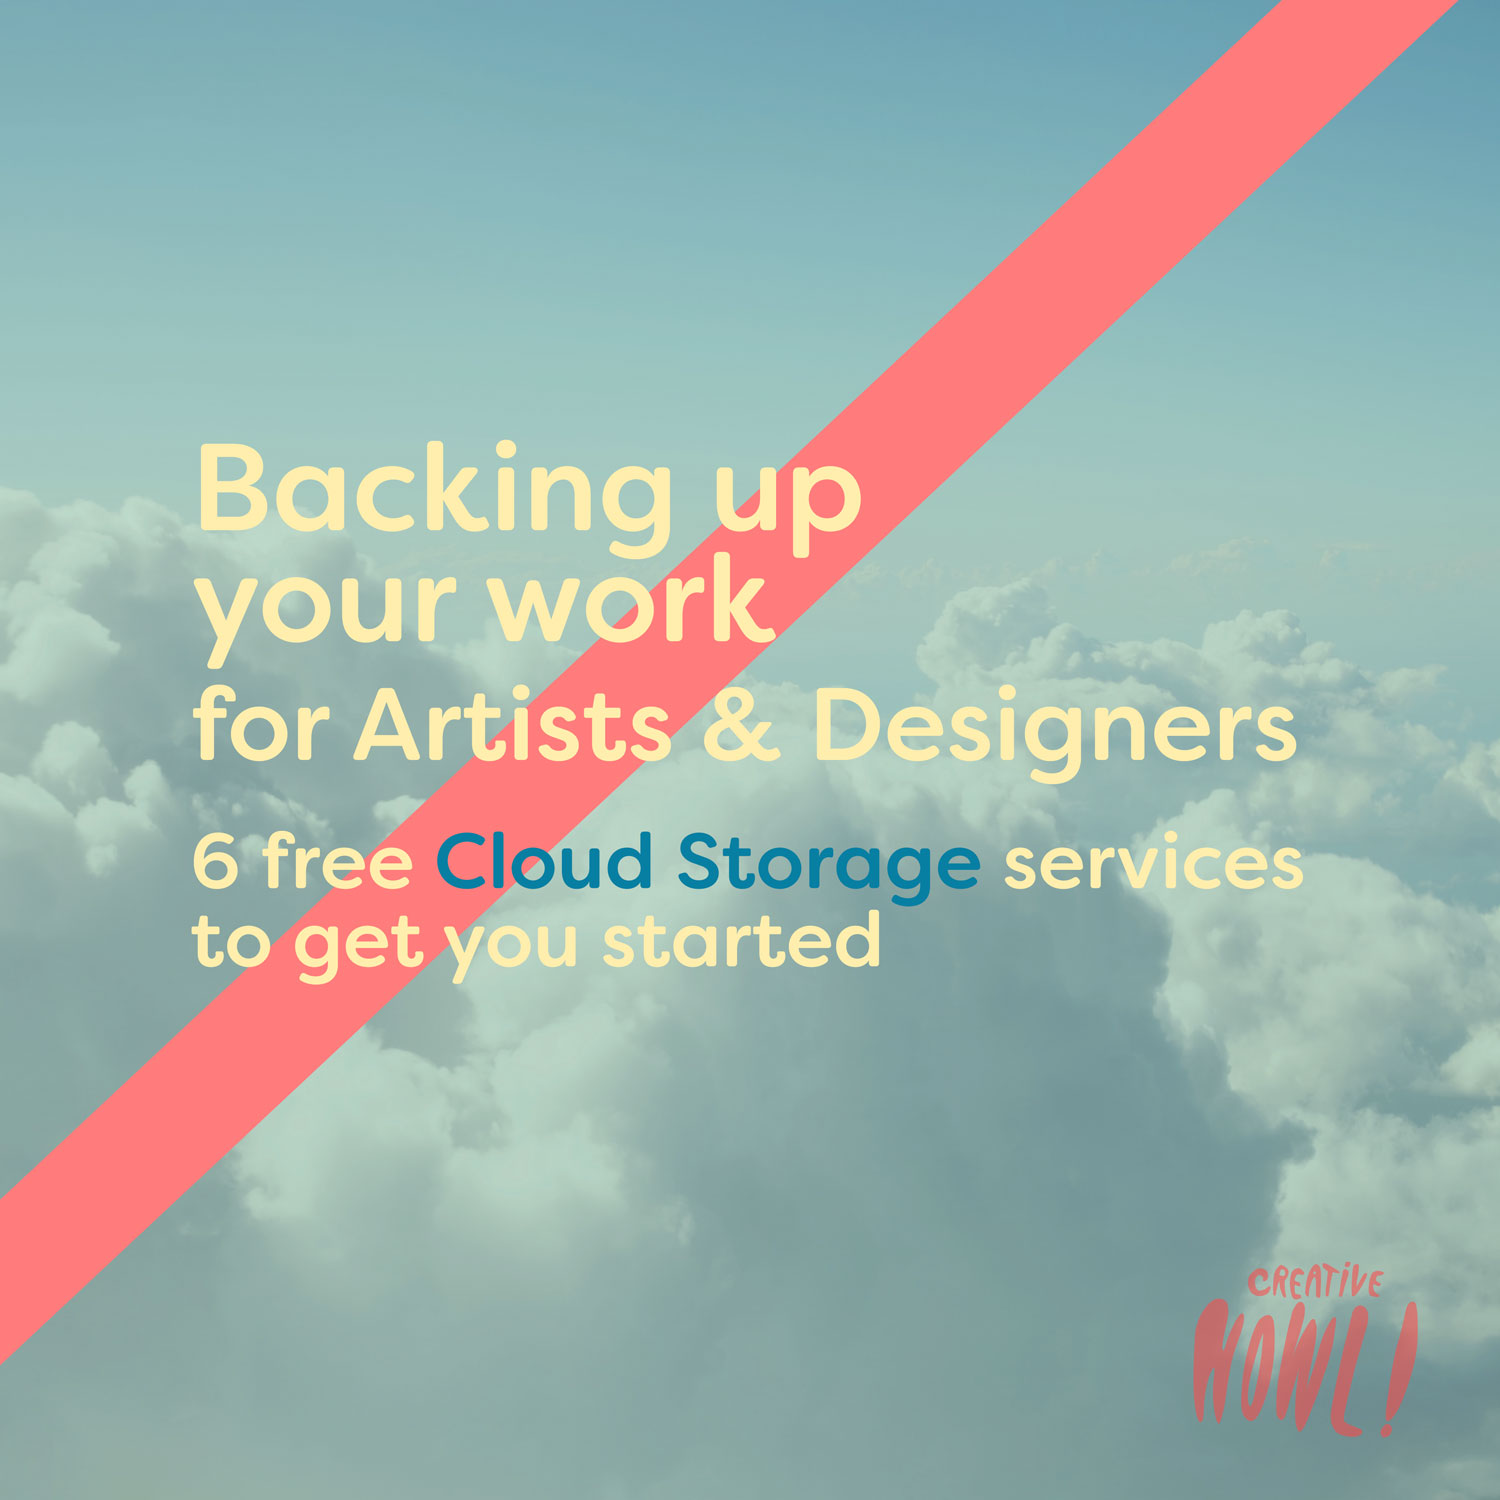 Backing up your work for Artists